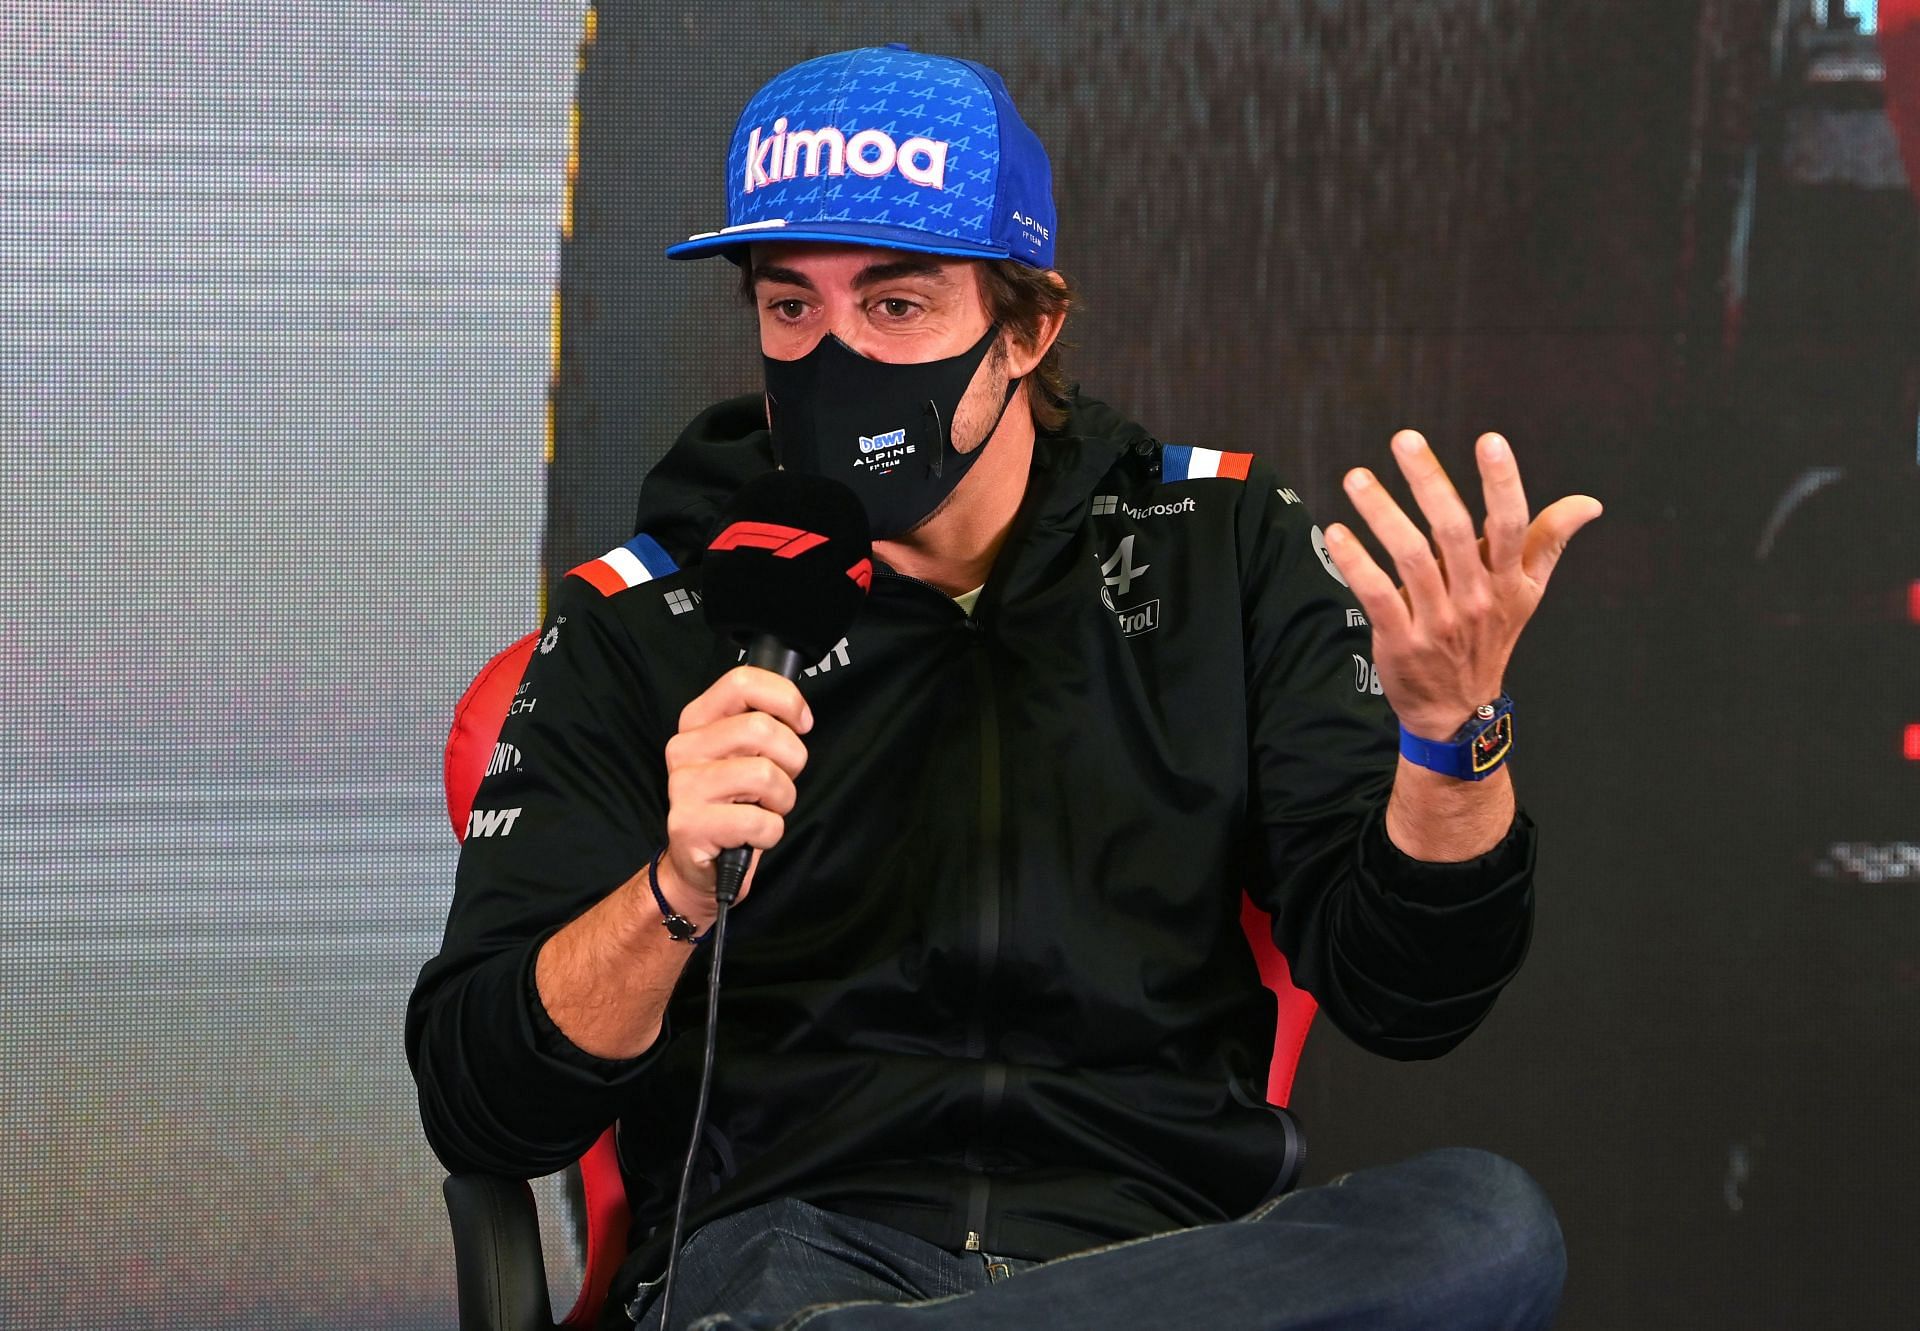 Fernando Alonso during the press conference for Formula 1 Testing in Barcelona - Day 2